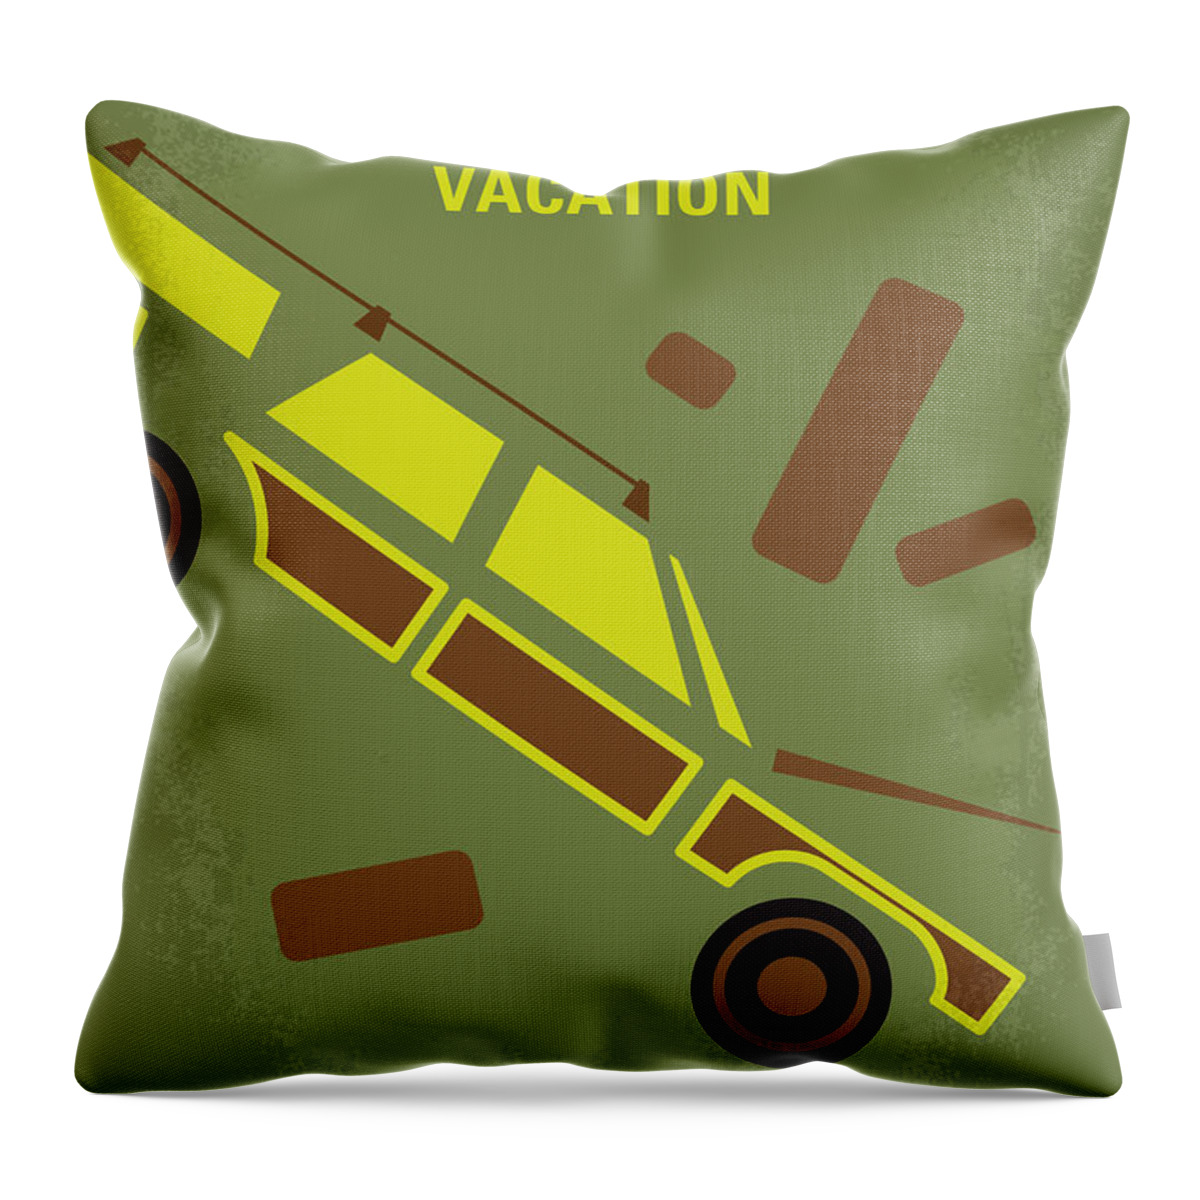 National Lampoons Vacation Throw Pillow featuring the digital art No412 My National Lampoons Vacation minimal movie poster by Chungkong Art